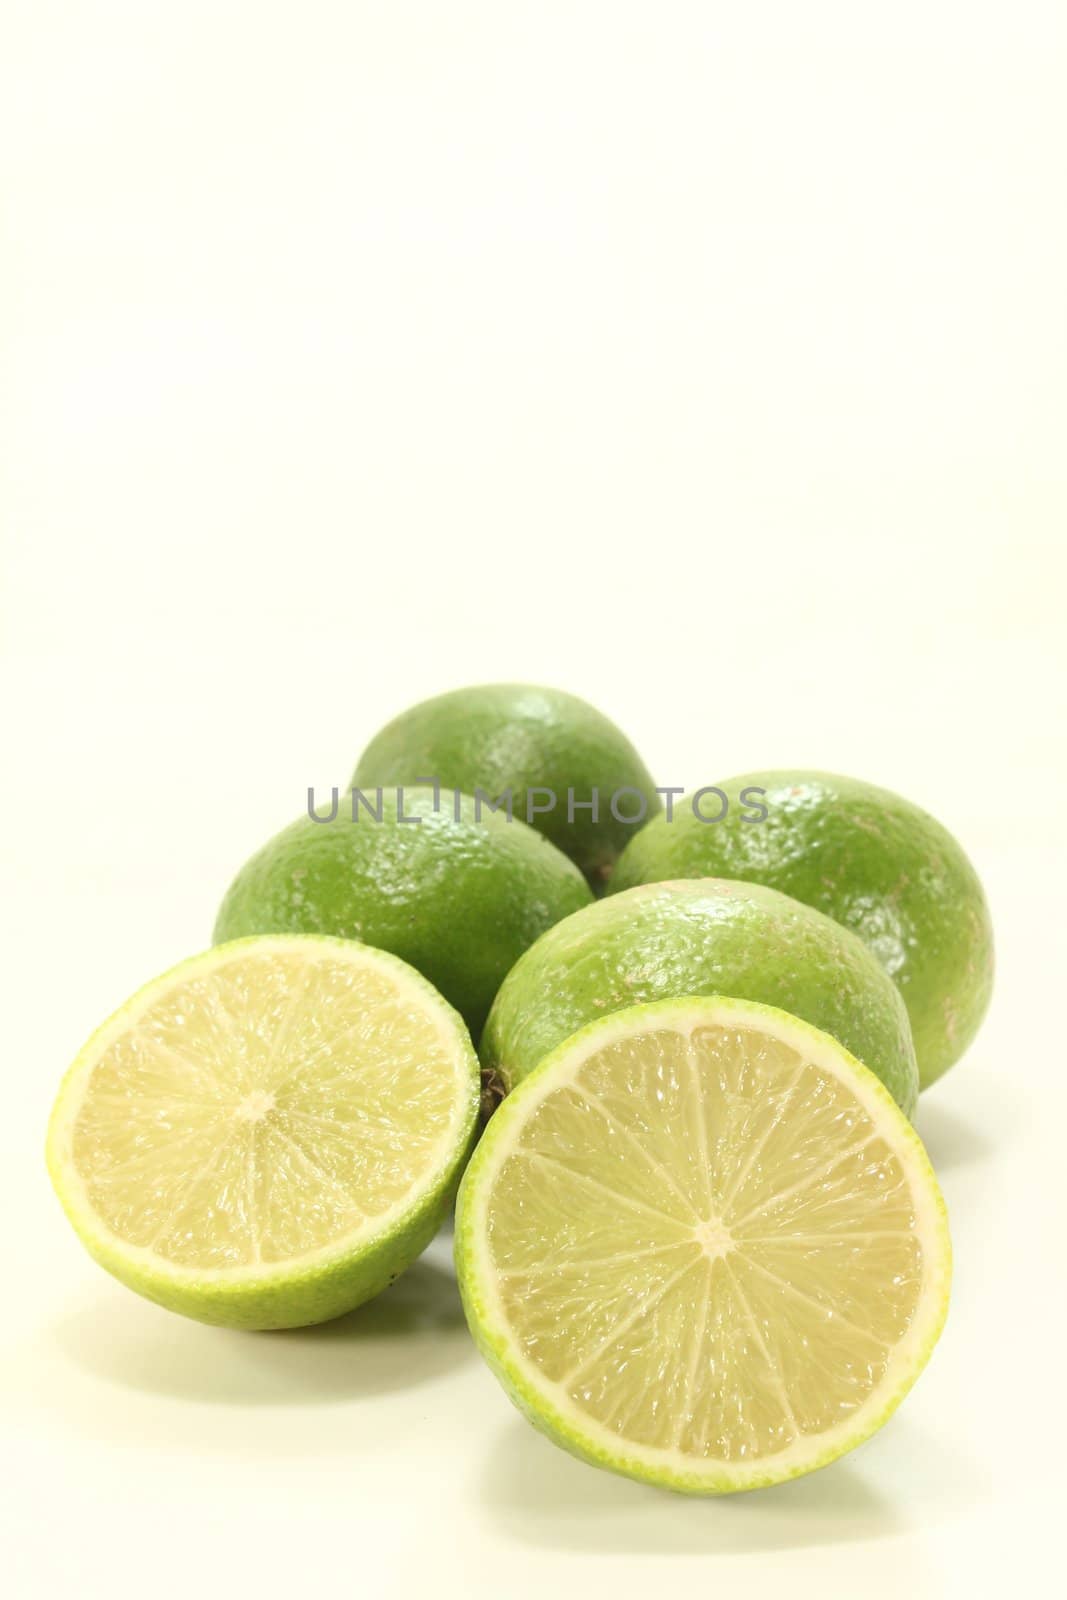 fresh green, juicy sliced and whole limes